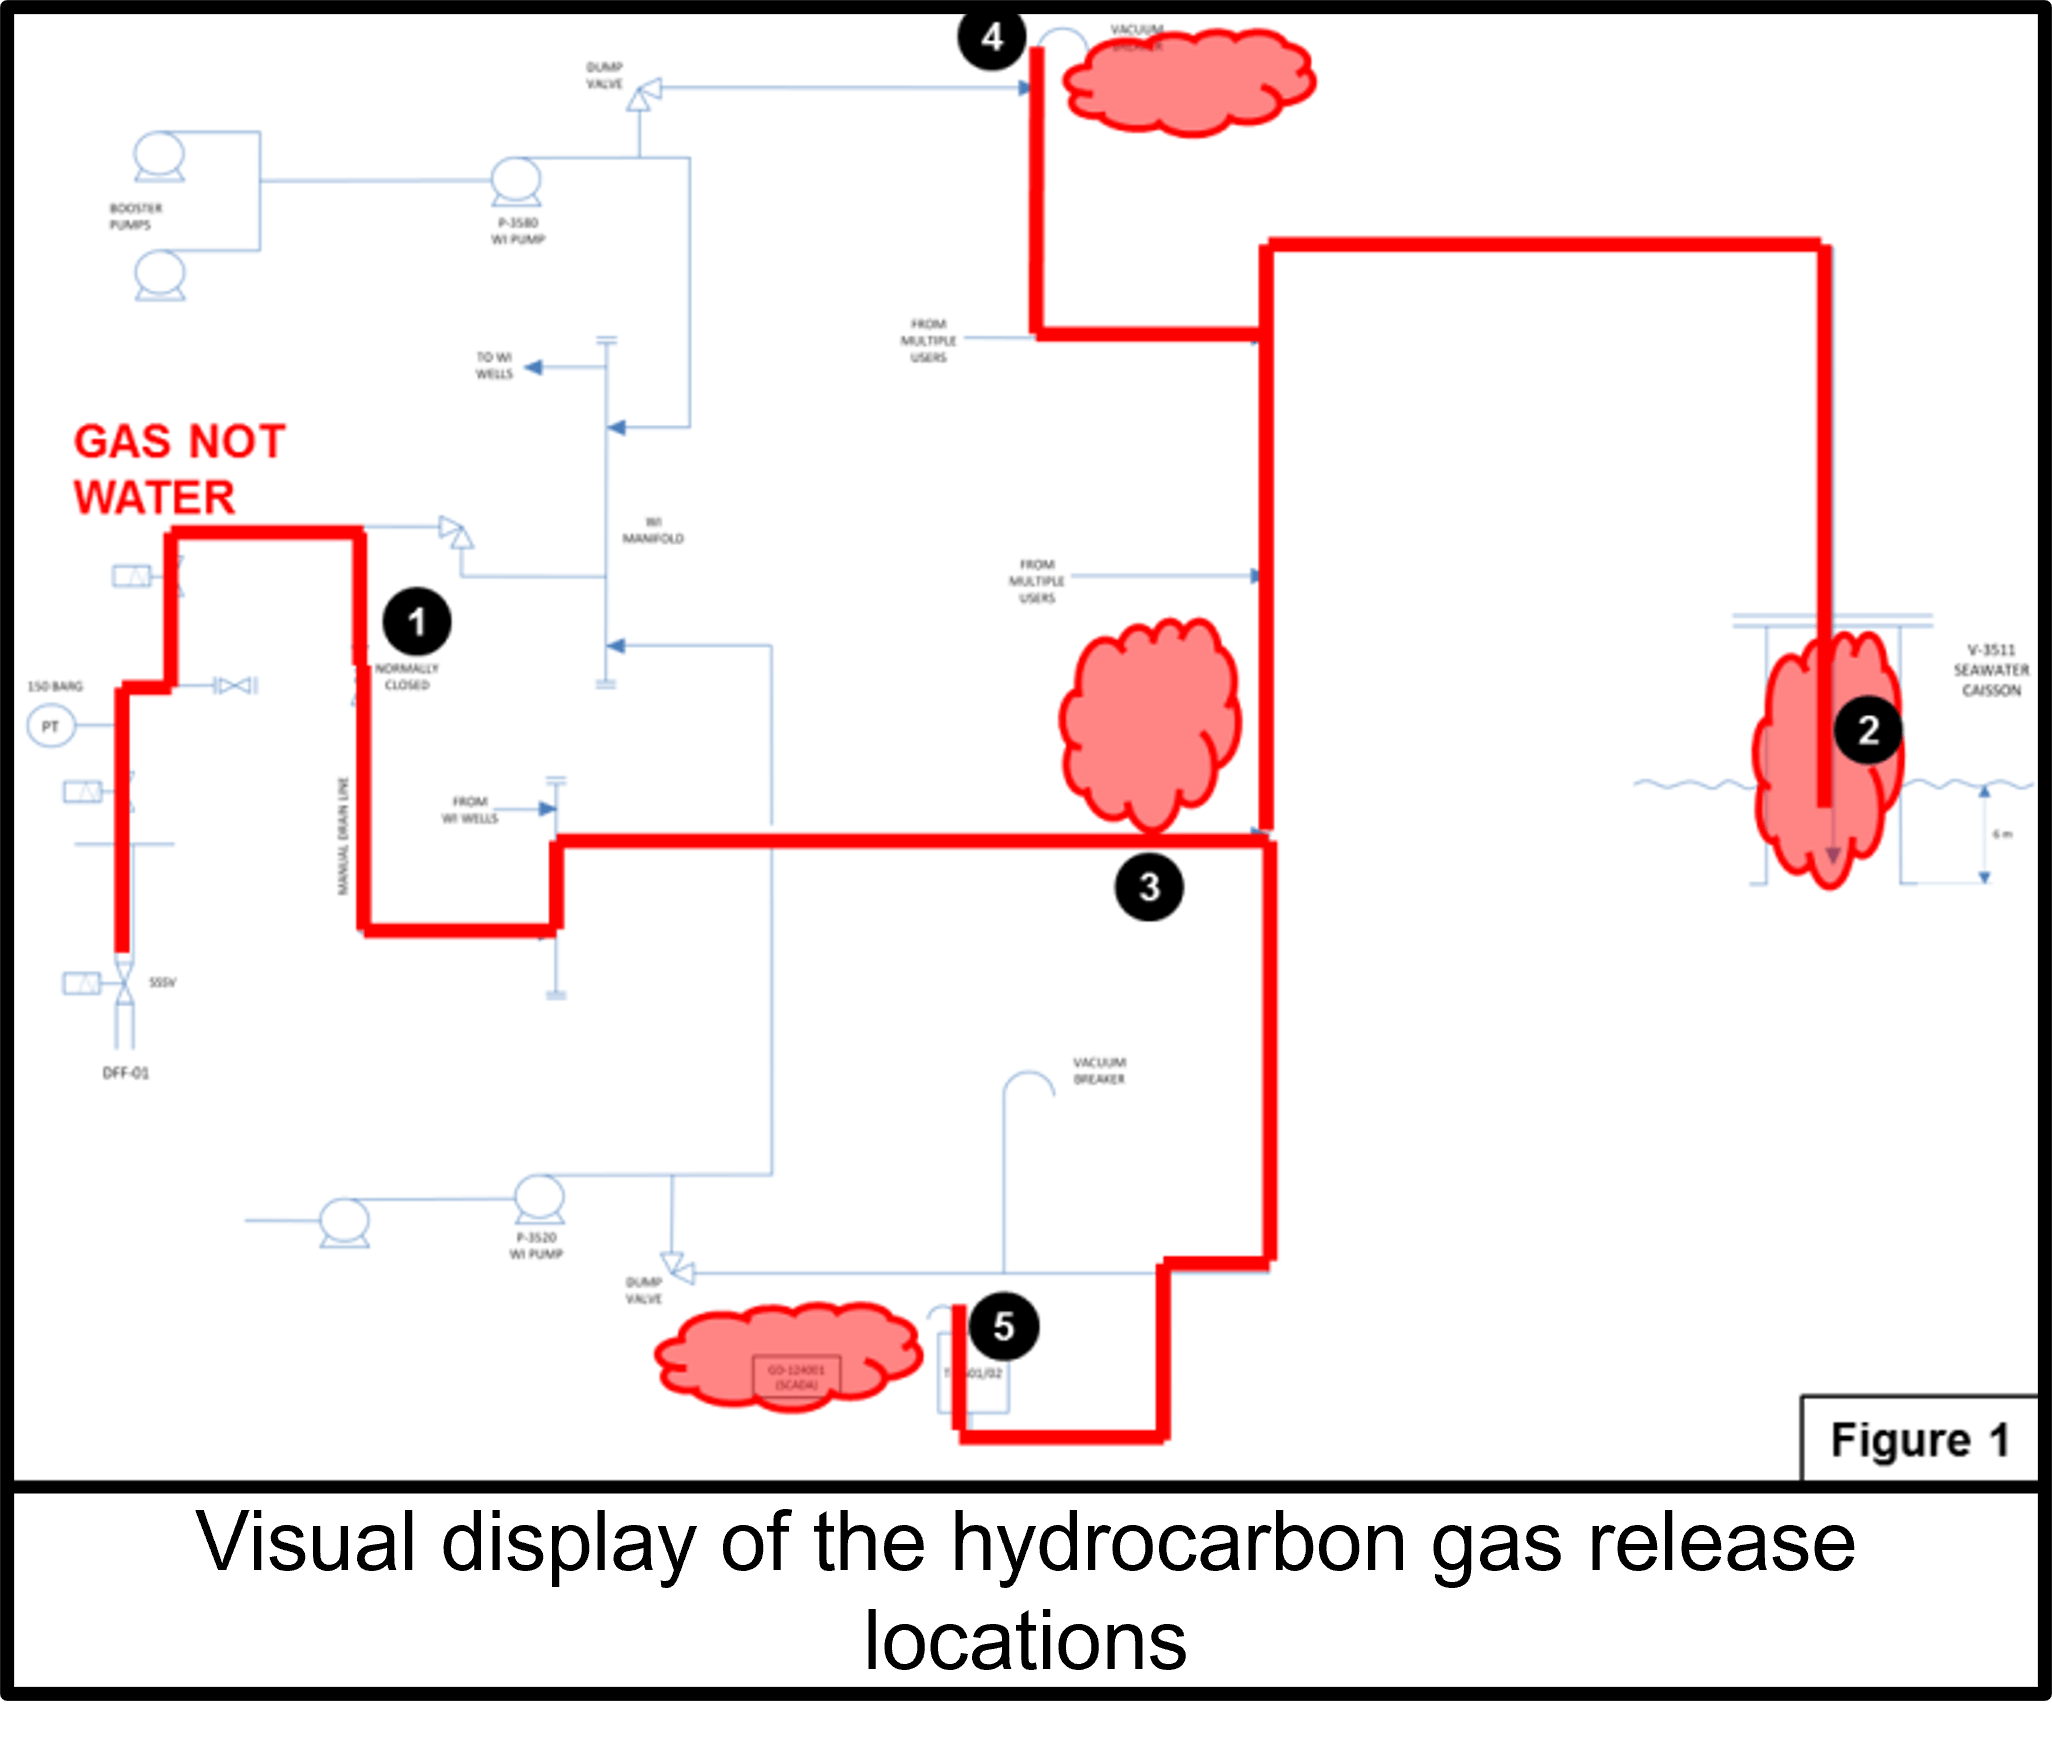 Visual display of the hydrocarbon gas release locations